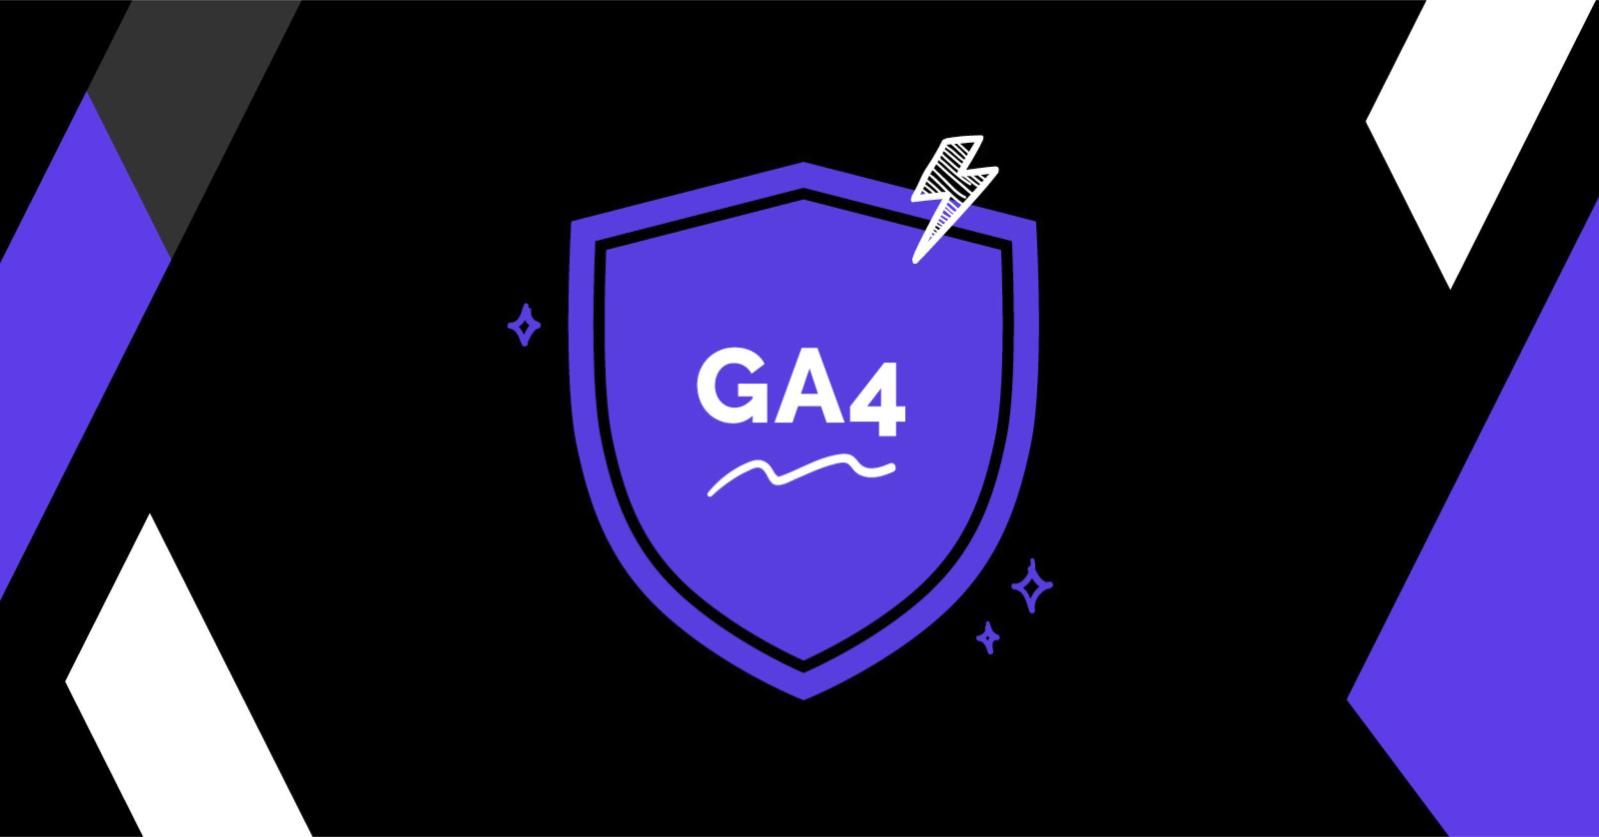 GA4 migration projects